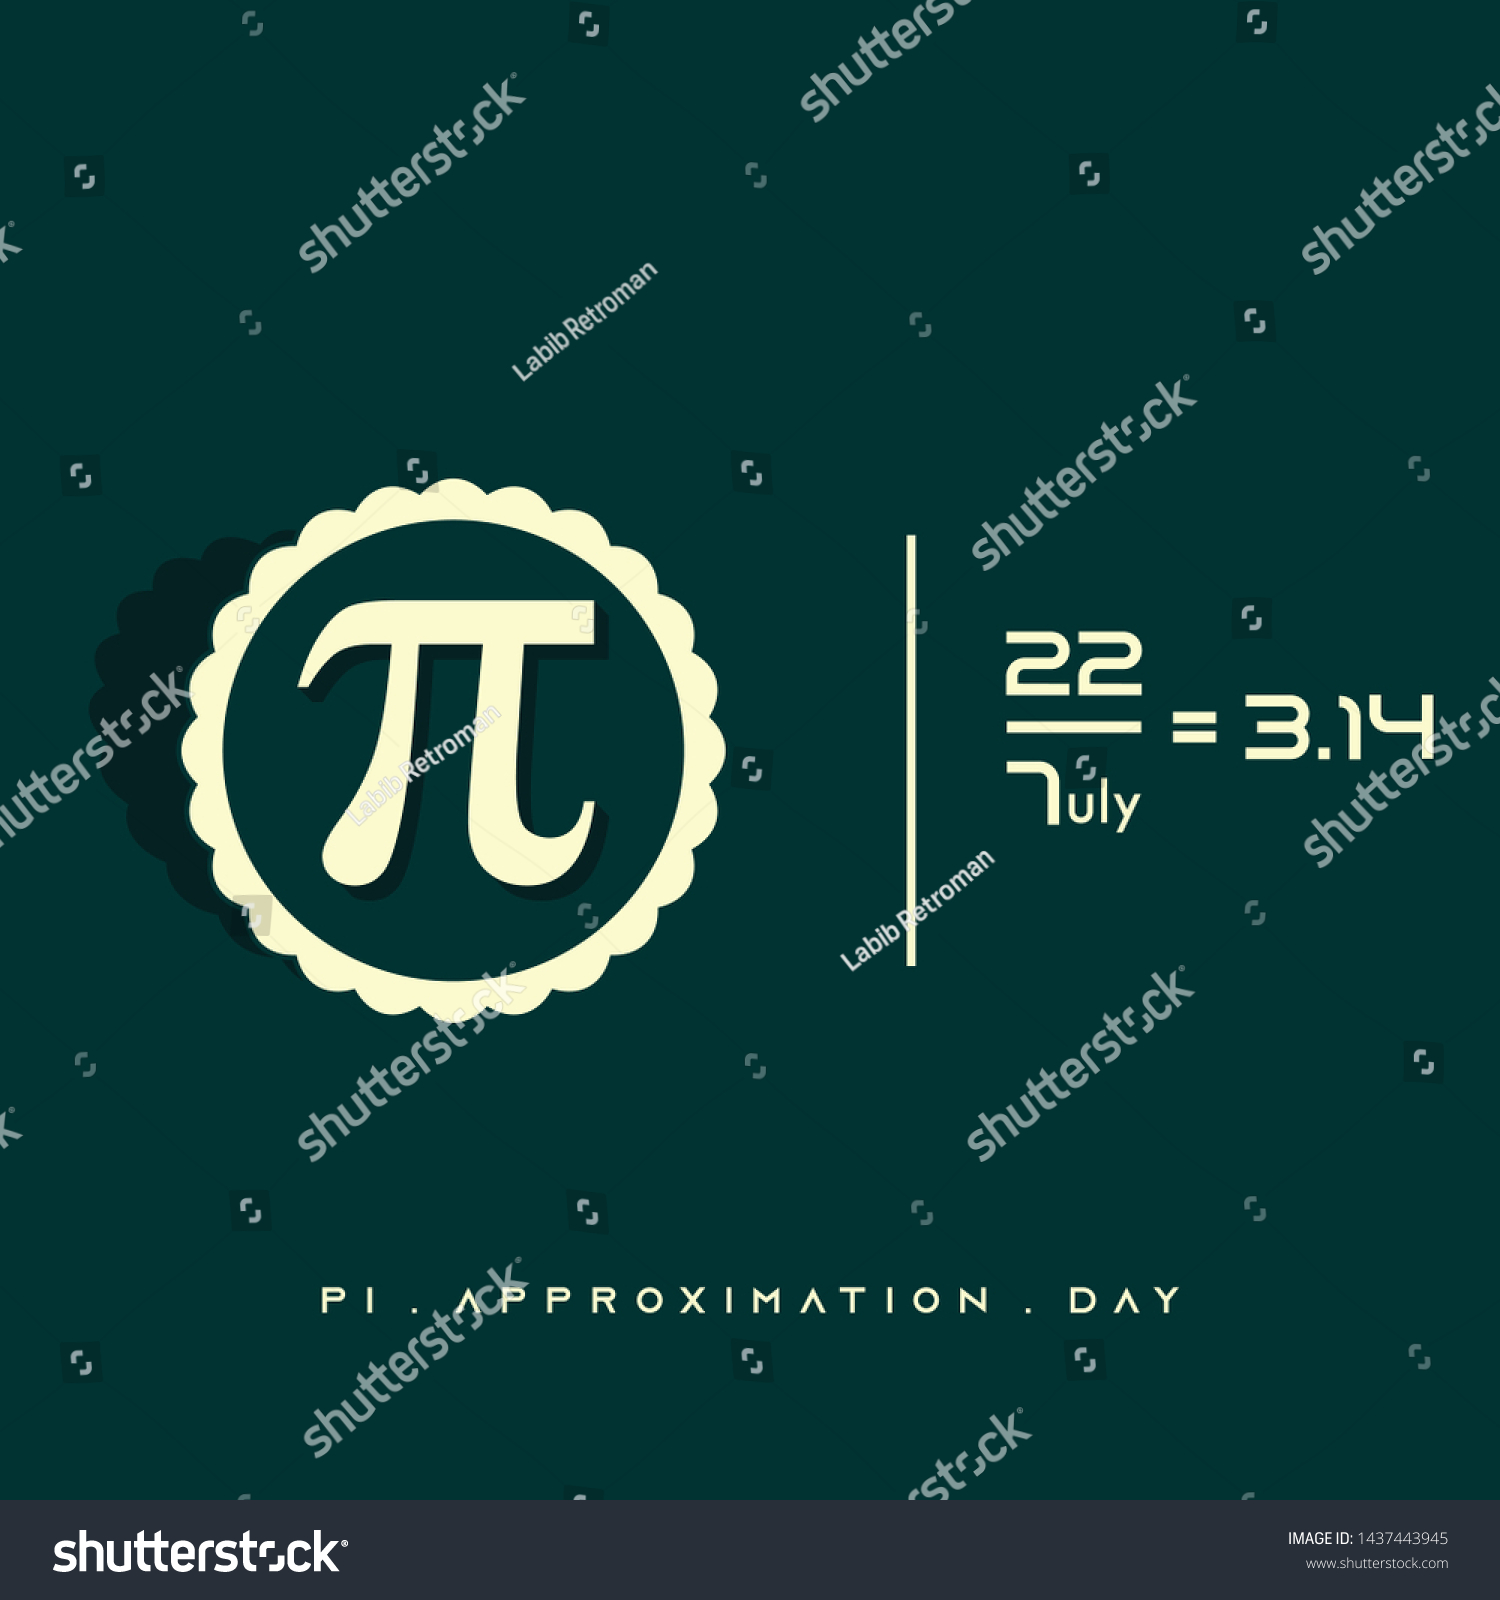 Pi Approximation Day Vector Design Formula Stock Vector (Royalty Free